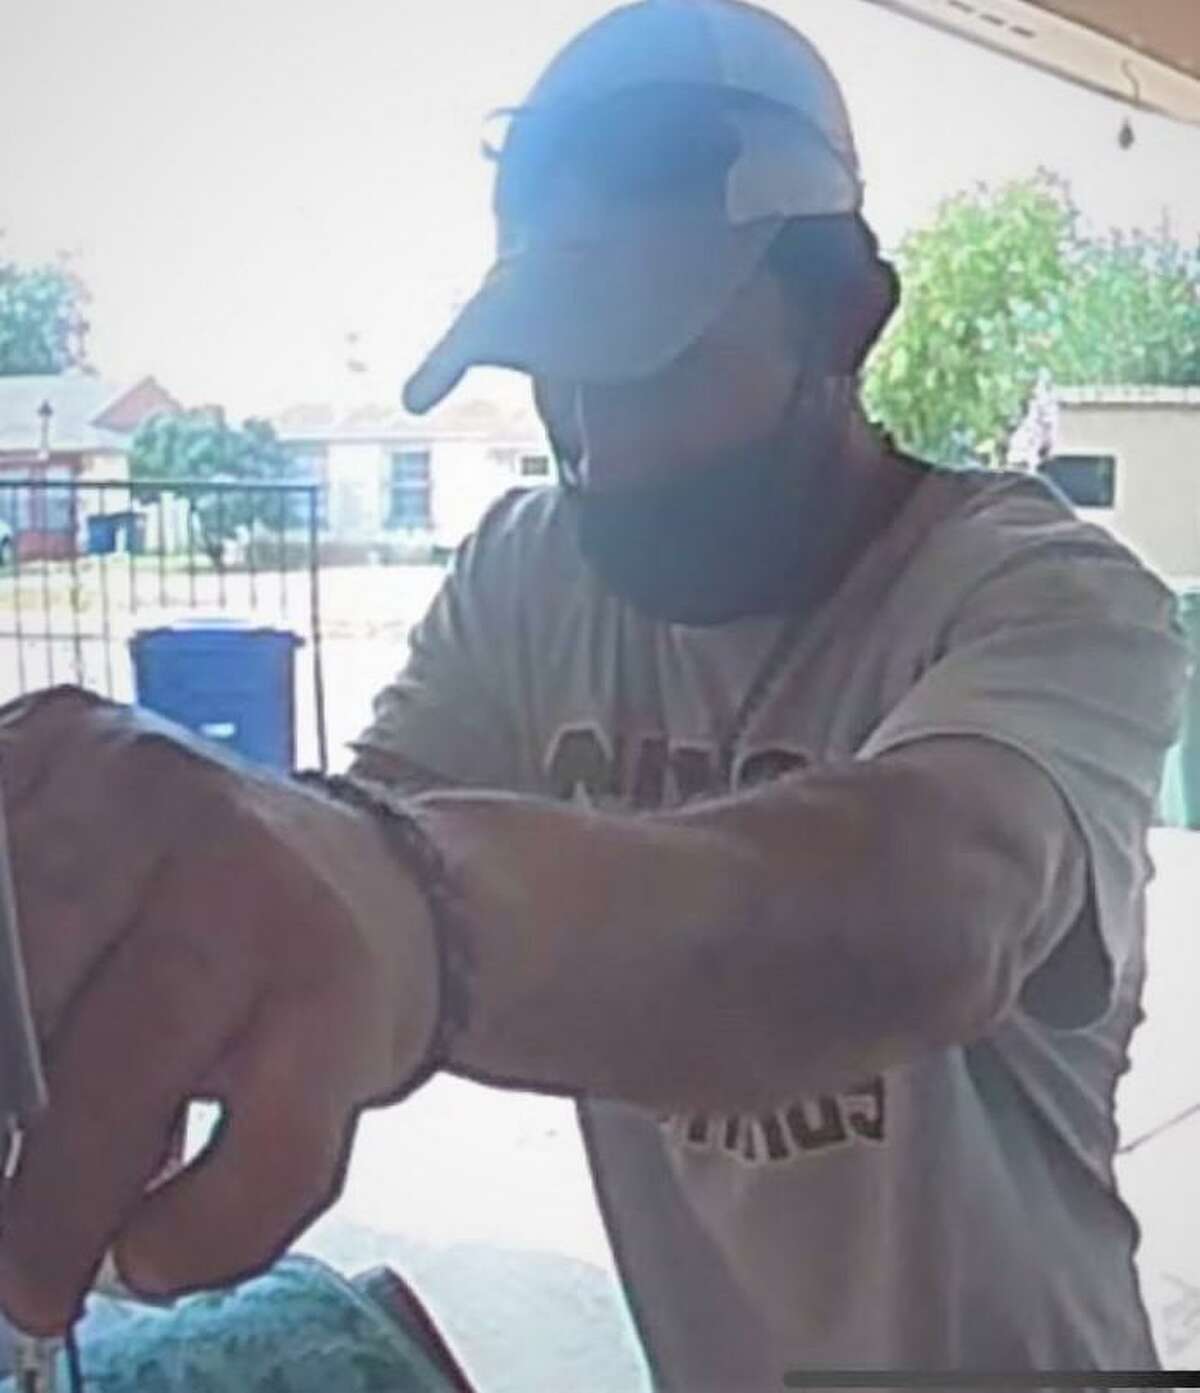 Laredo police said this man is responsible for thefts of lawn decoration inflatables. To provide information on his identity, call police at 795-2800 or Laredo Crime Stoppers at 727-TIPS (8477).